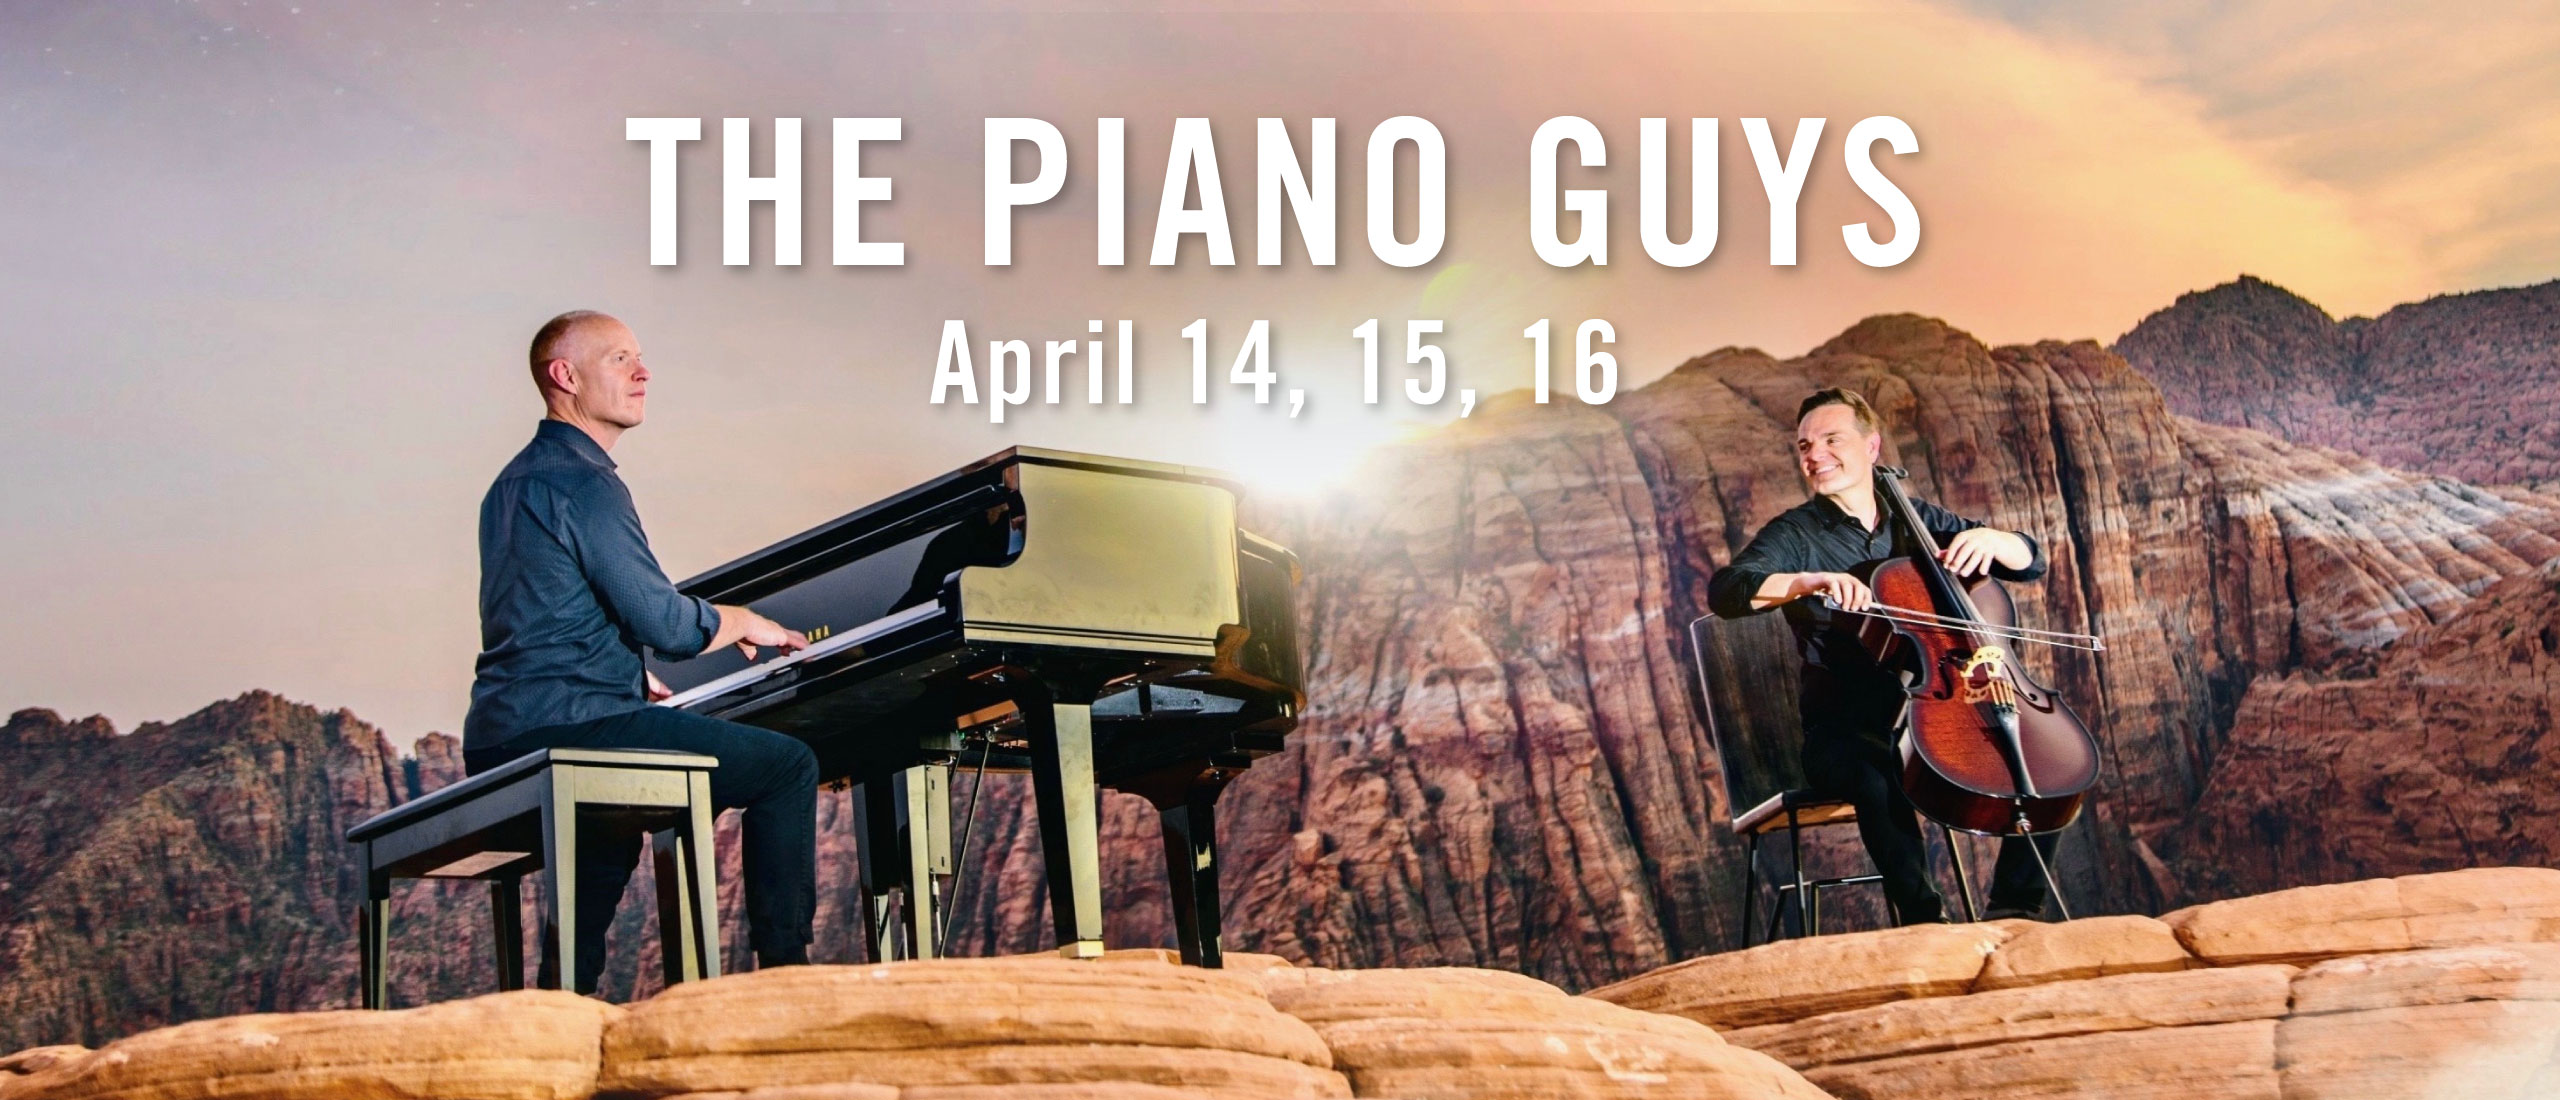 the Piano Guys April 14, 15, 16